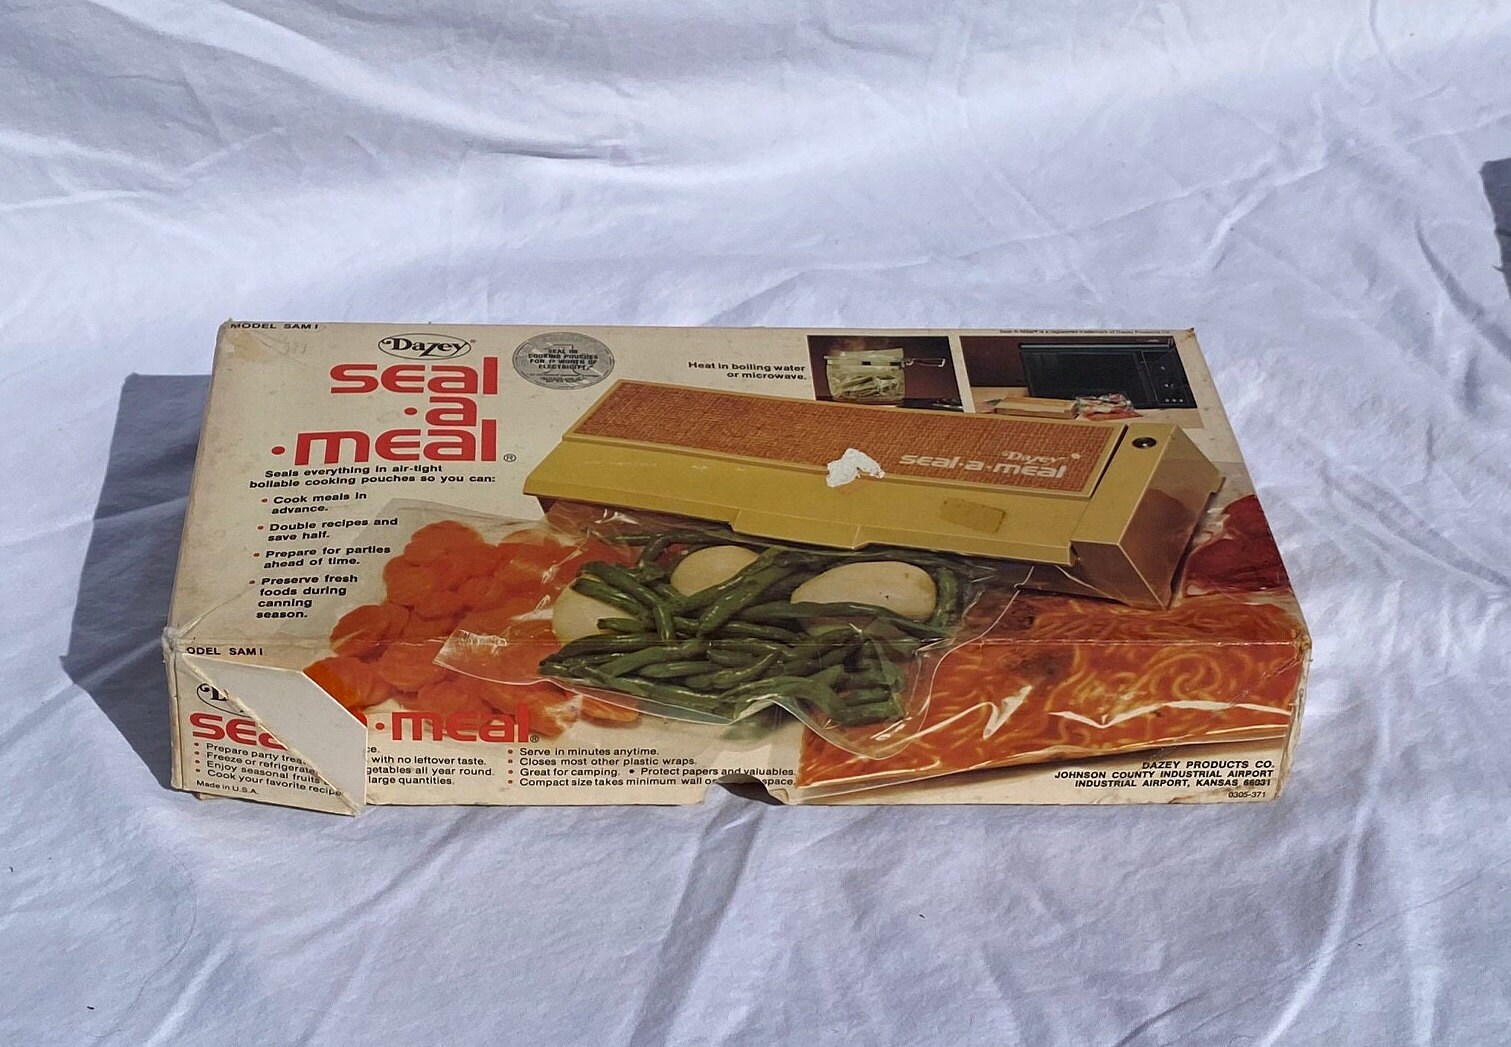 Vintage Dazey Seal A Meal Bags Boilable Cooking 12 Pouches 8 x 12 Model 6003